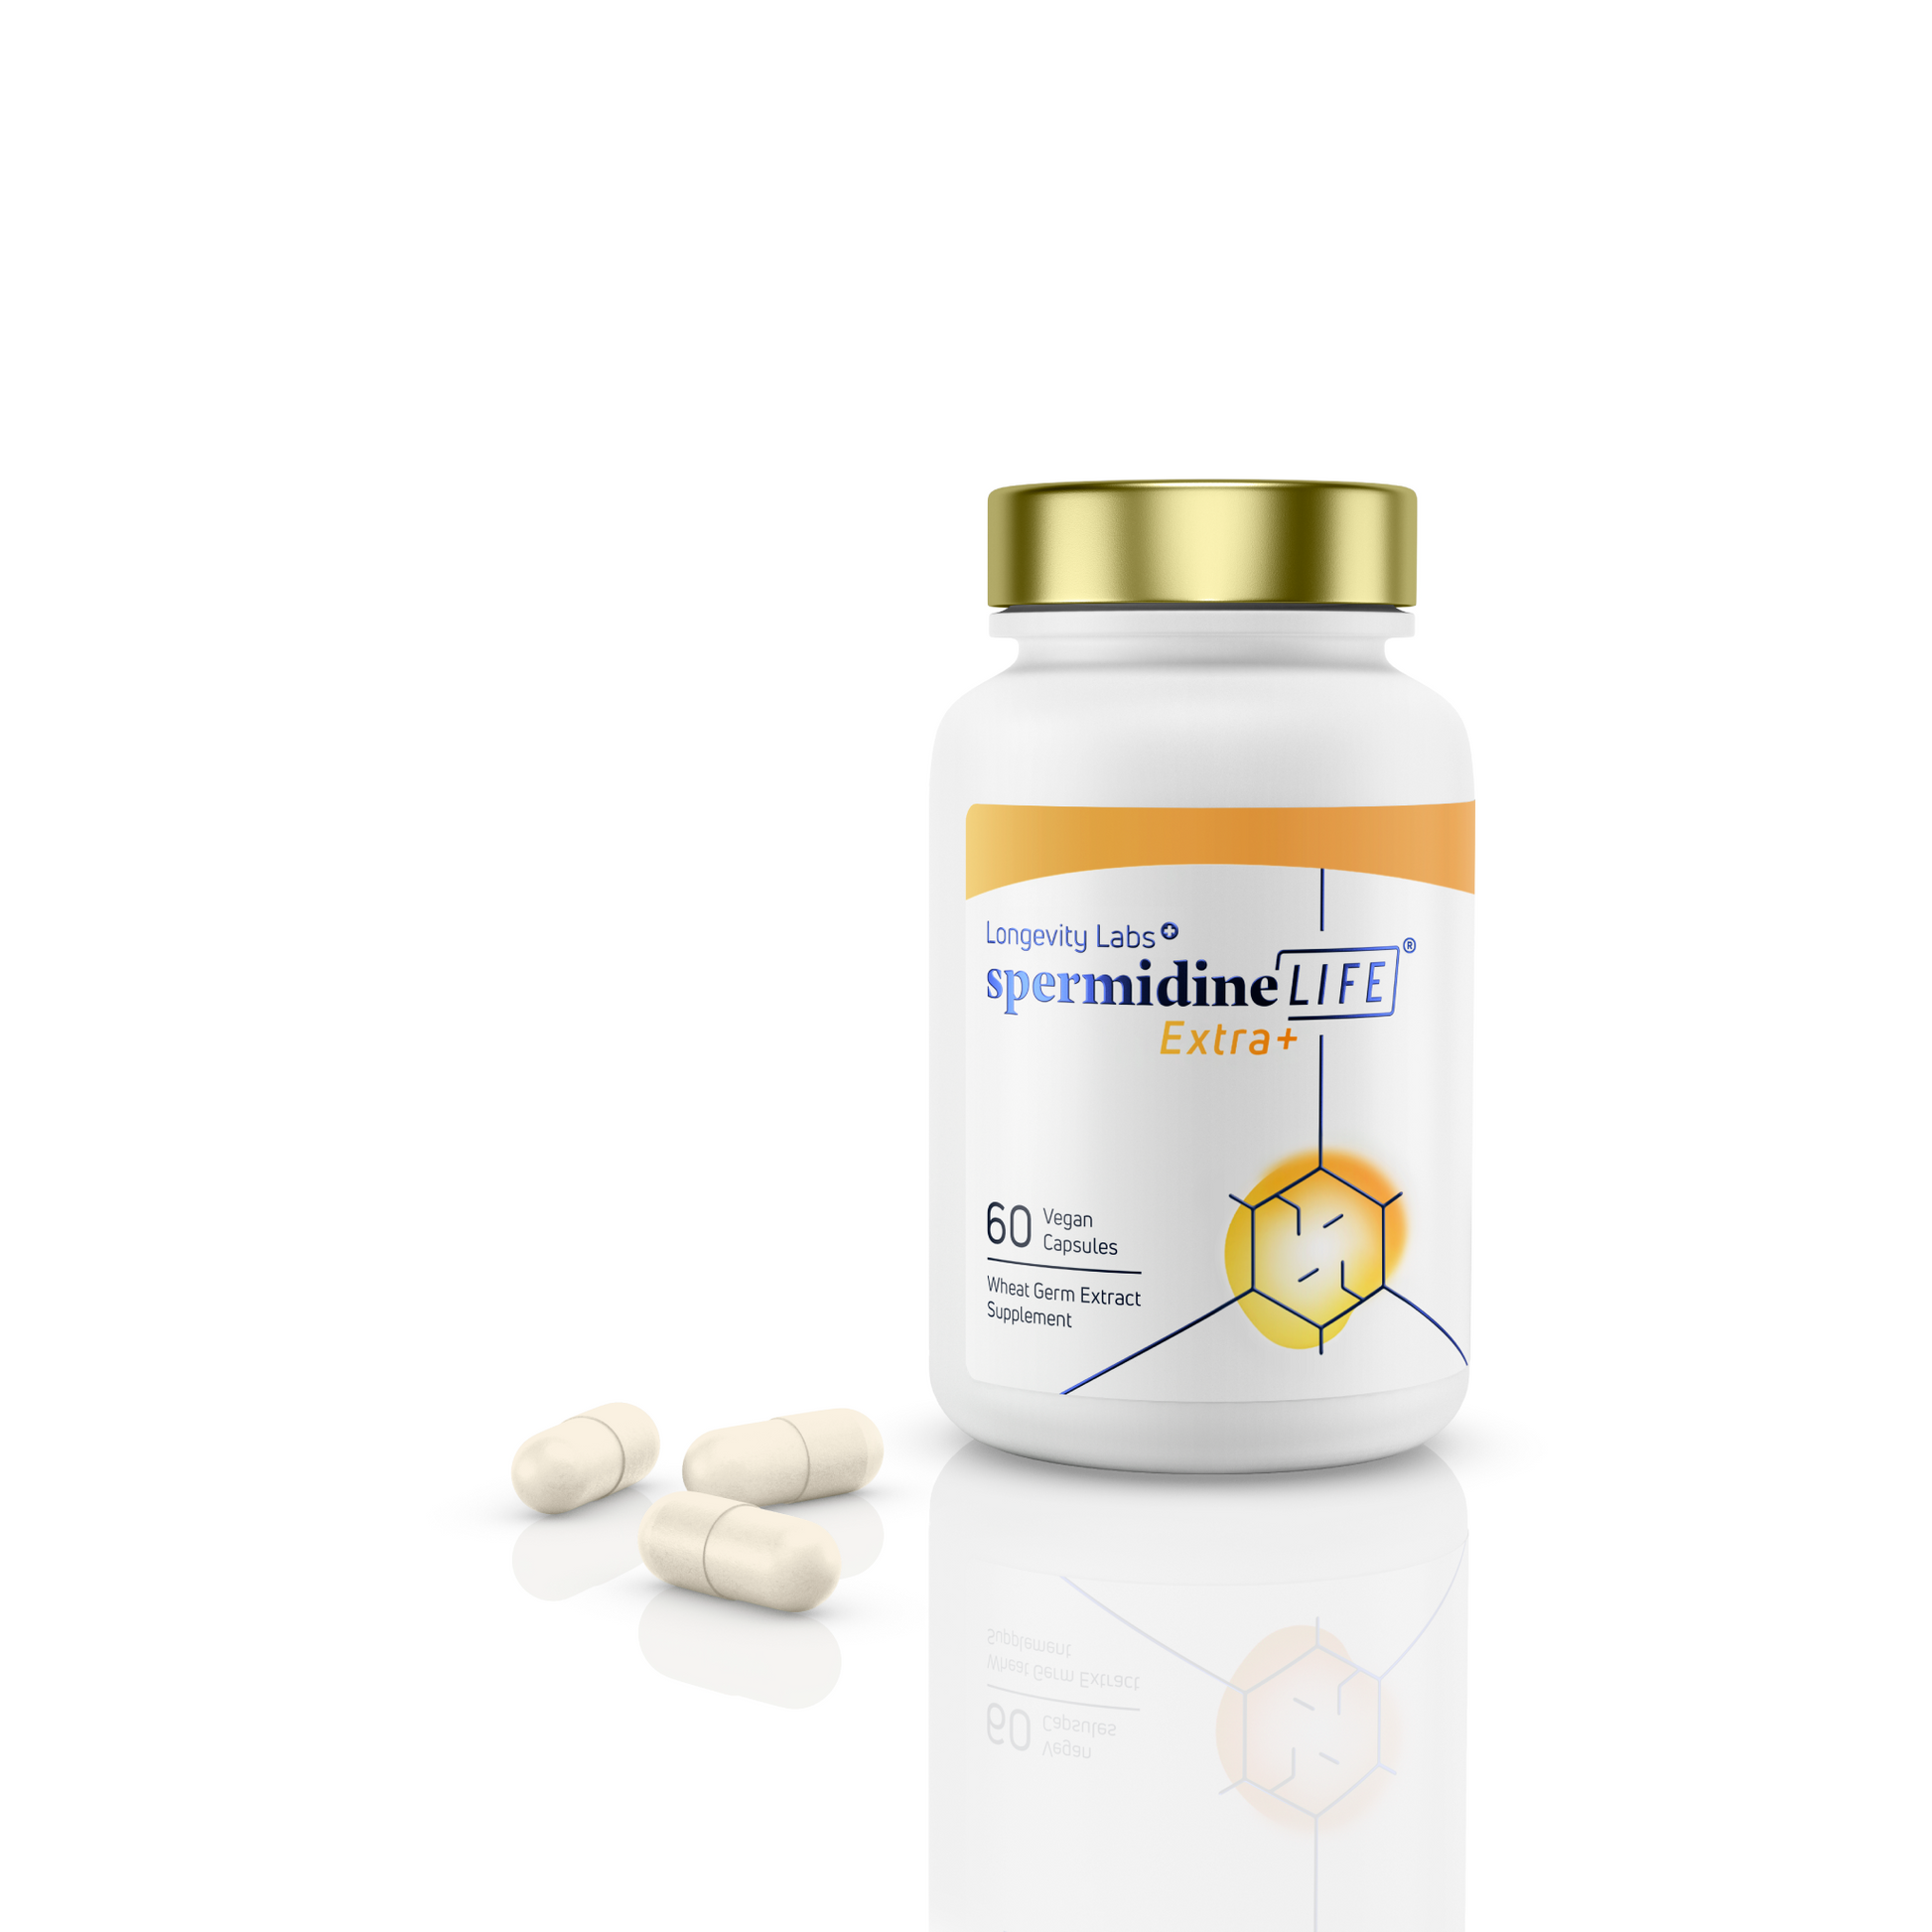 A bottle of spermidineLIFE® Extra+ 1300mg Dietary Supplement by Longevity Labs, Inc with pills on a white background.